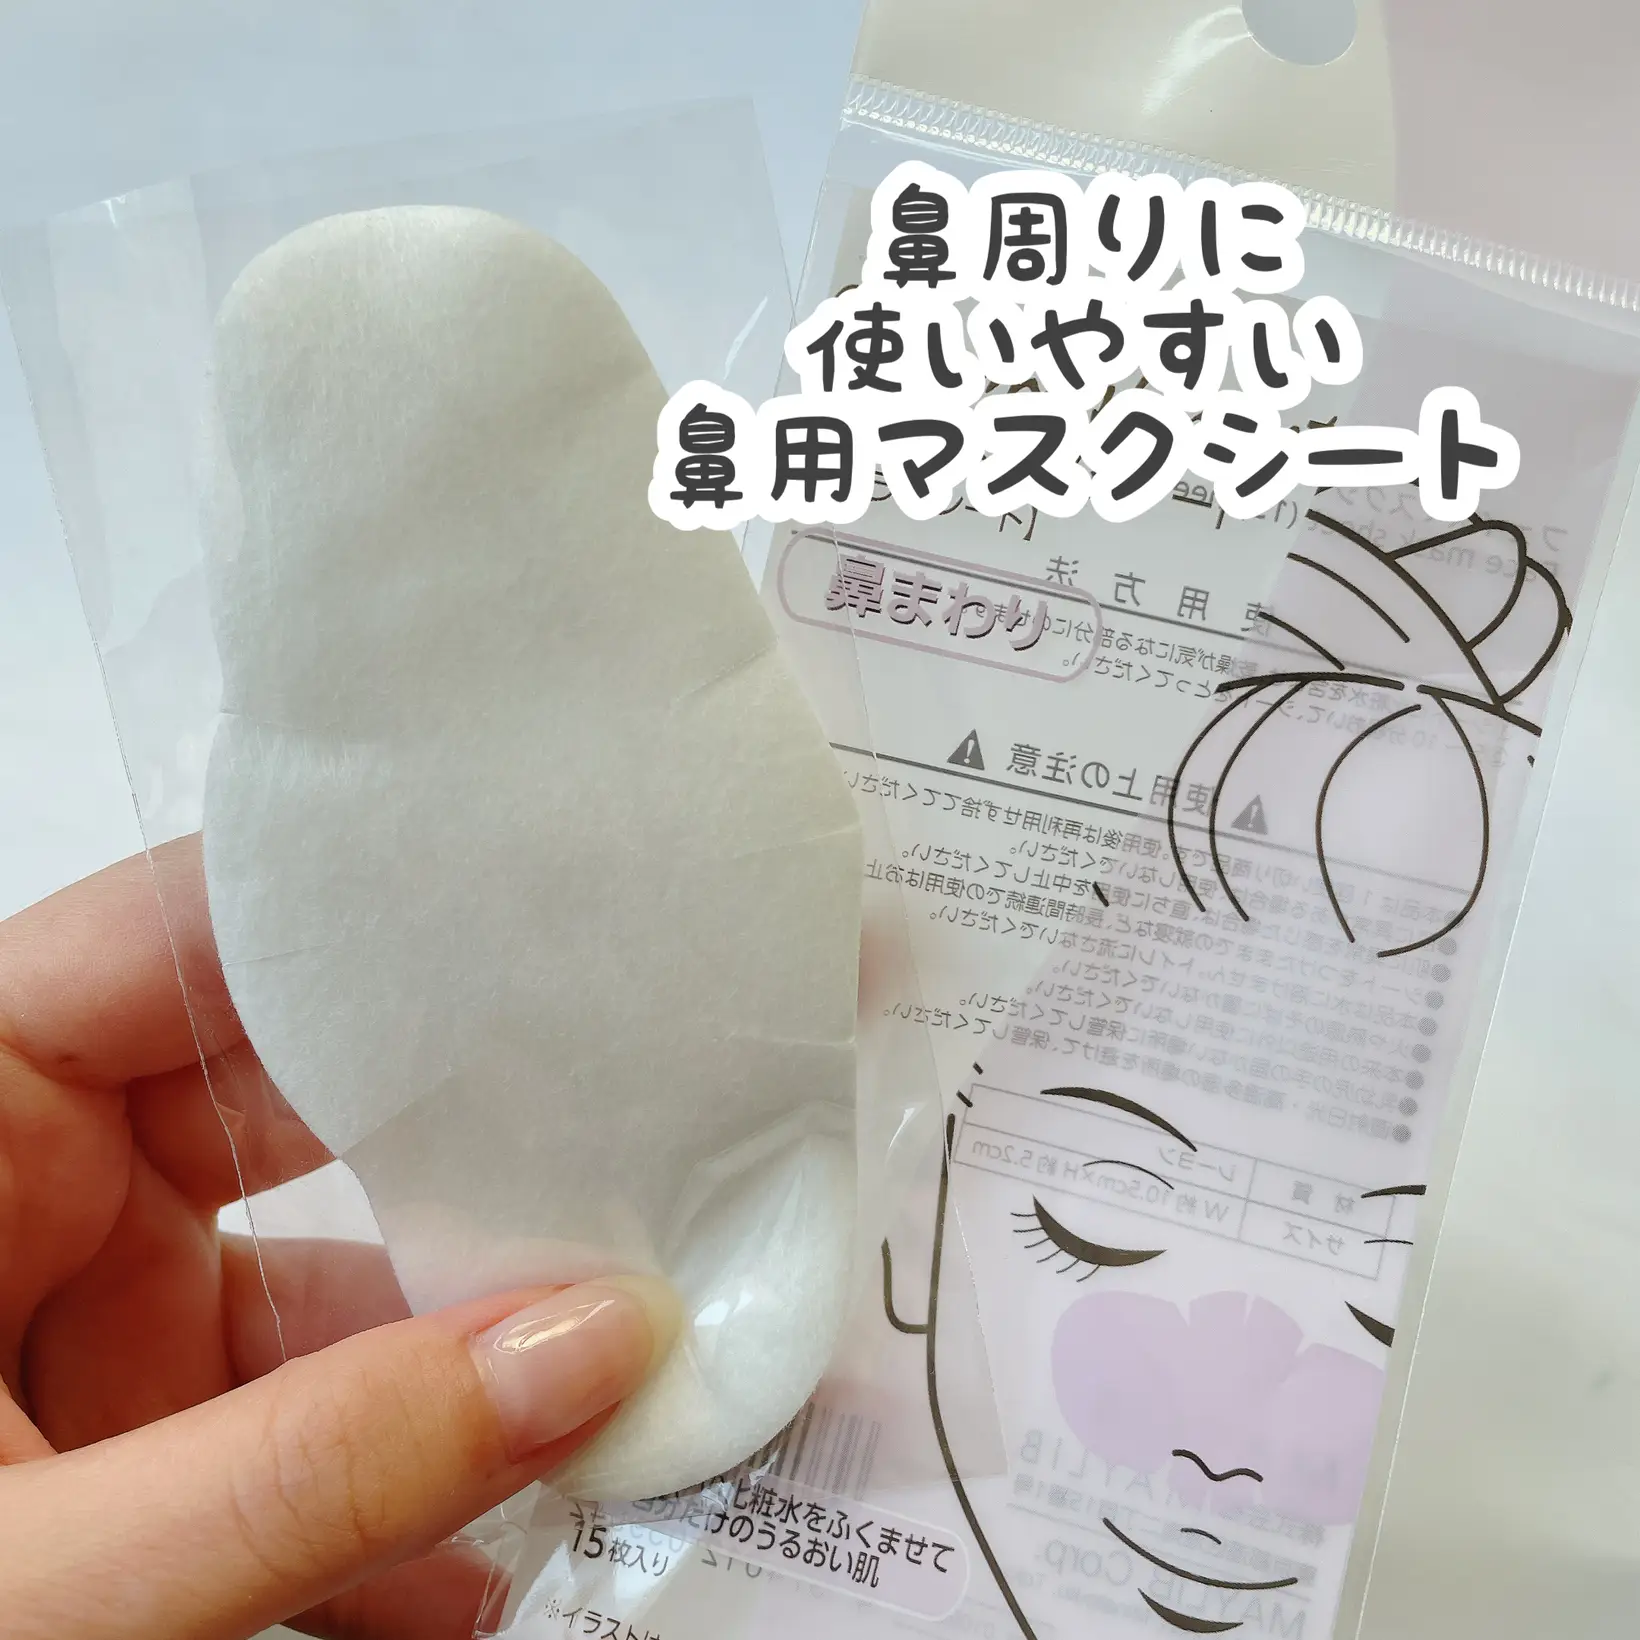 Daiso Japan PH - Don't forget to wear a face mask every